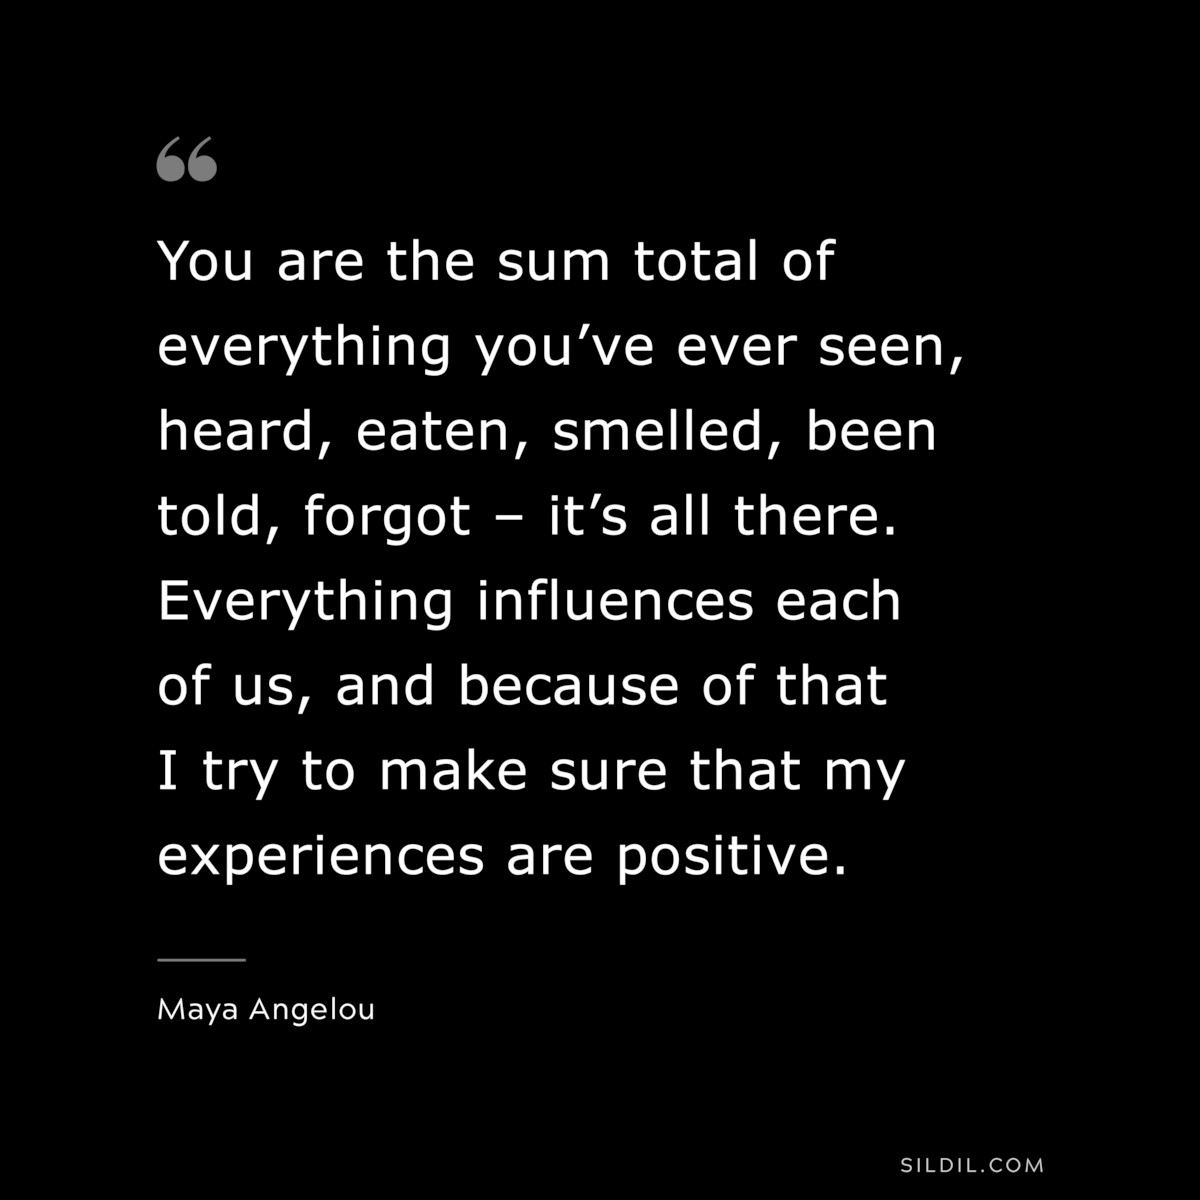 You are the sum total of everything you’ve ever seen, heard, eaten, smelled, been told, forgot – it’s all there. Everything influences each of us, and because of that I try to make sure that my experiences are positive. ― Maya Angelou